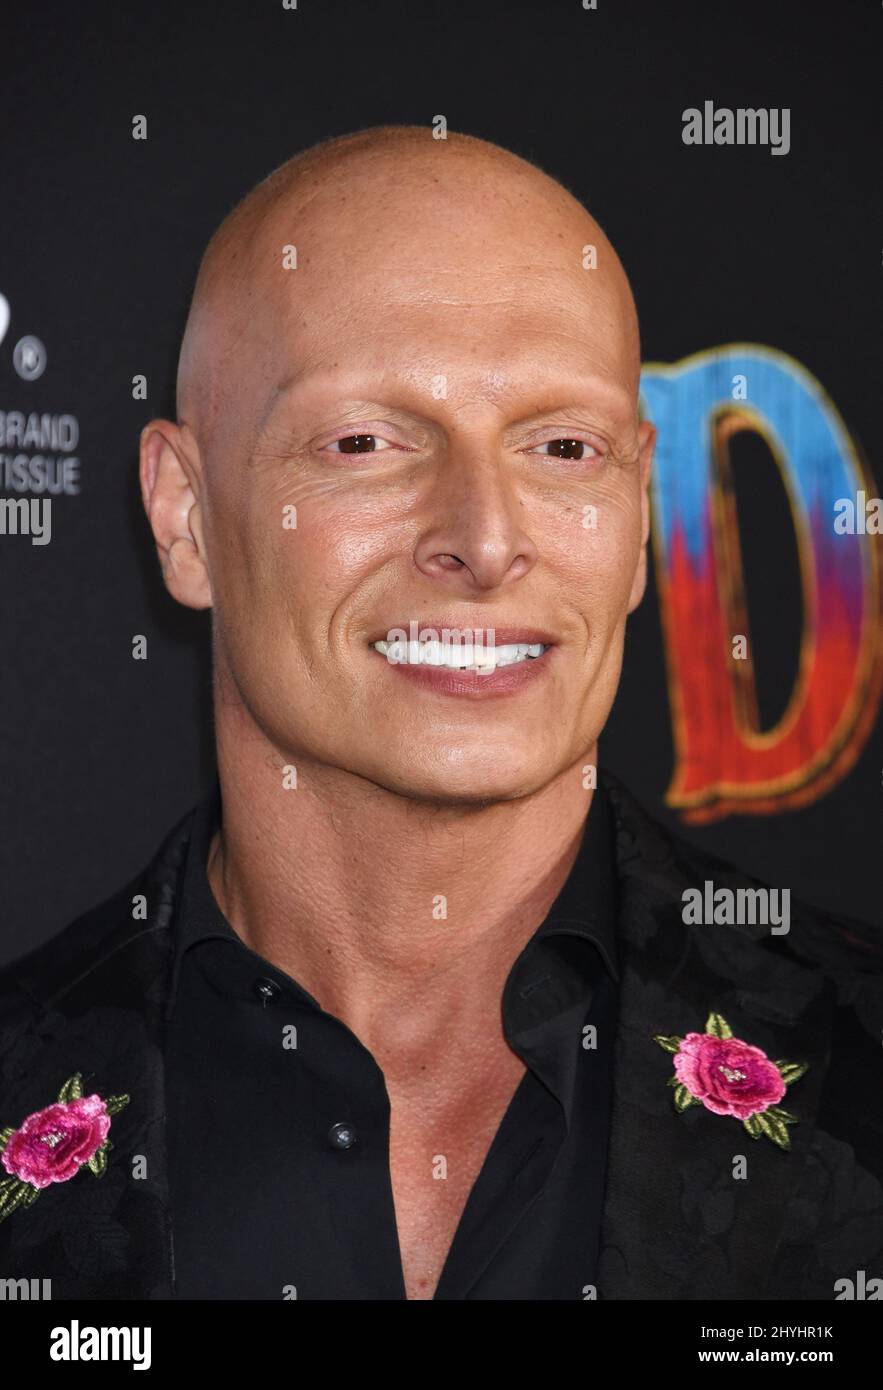 Joseph Gatt arriving for Disney's premiere of 'Dumbo' held at the El Capitan Theatre on March 11, 2019 in Hollywood, Los Angeles. Stock Photo